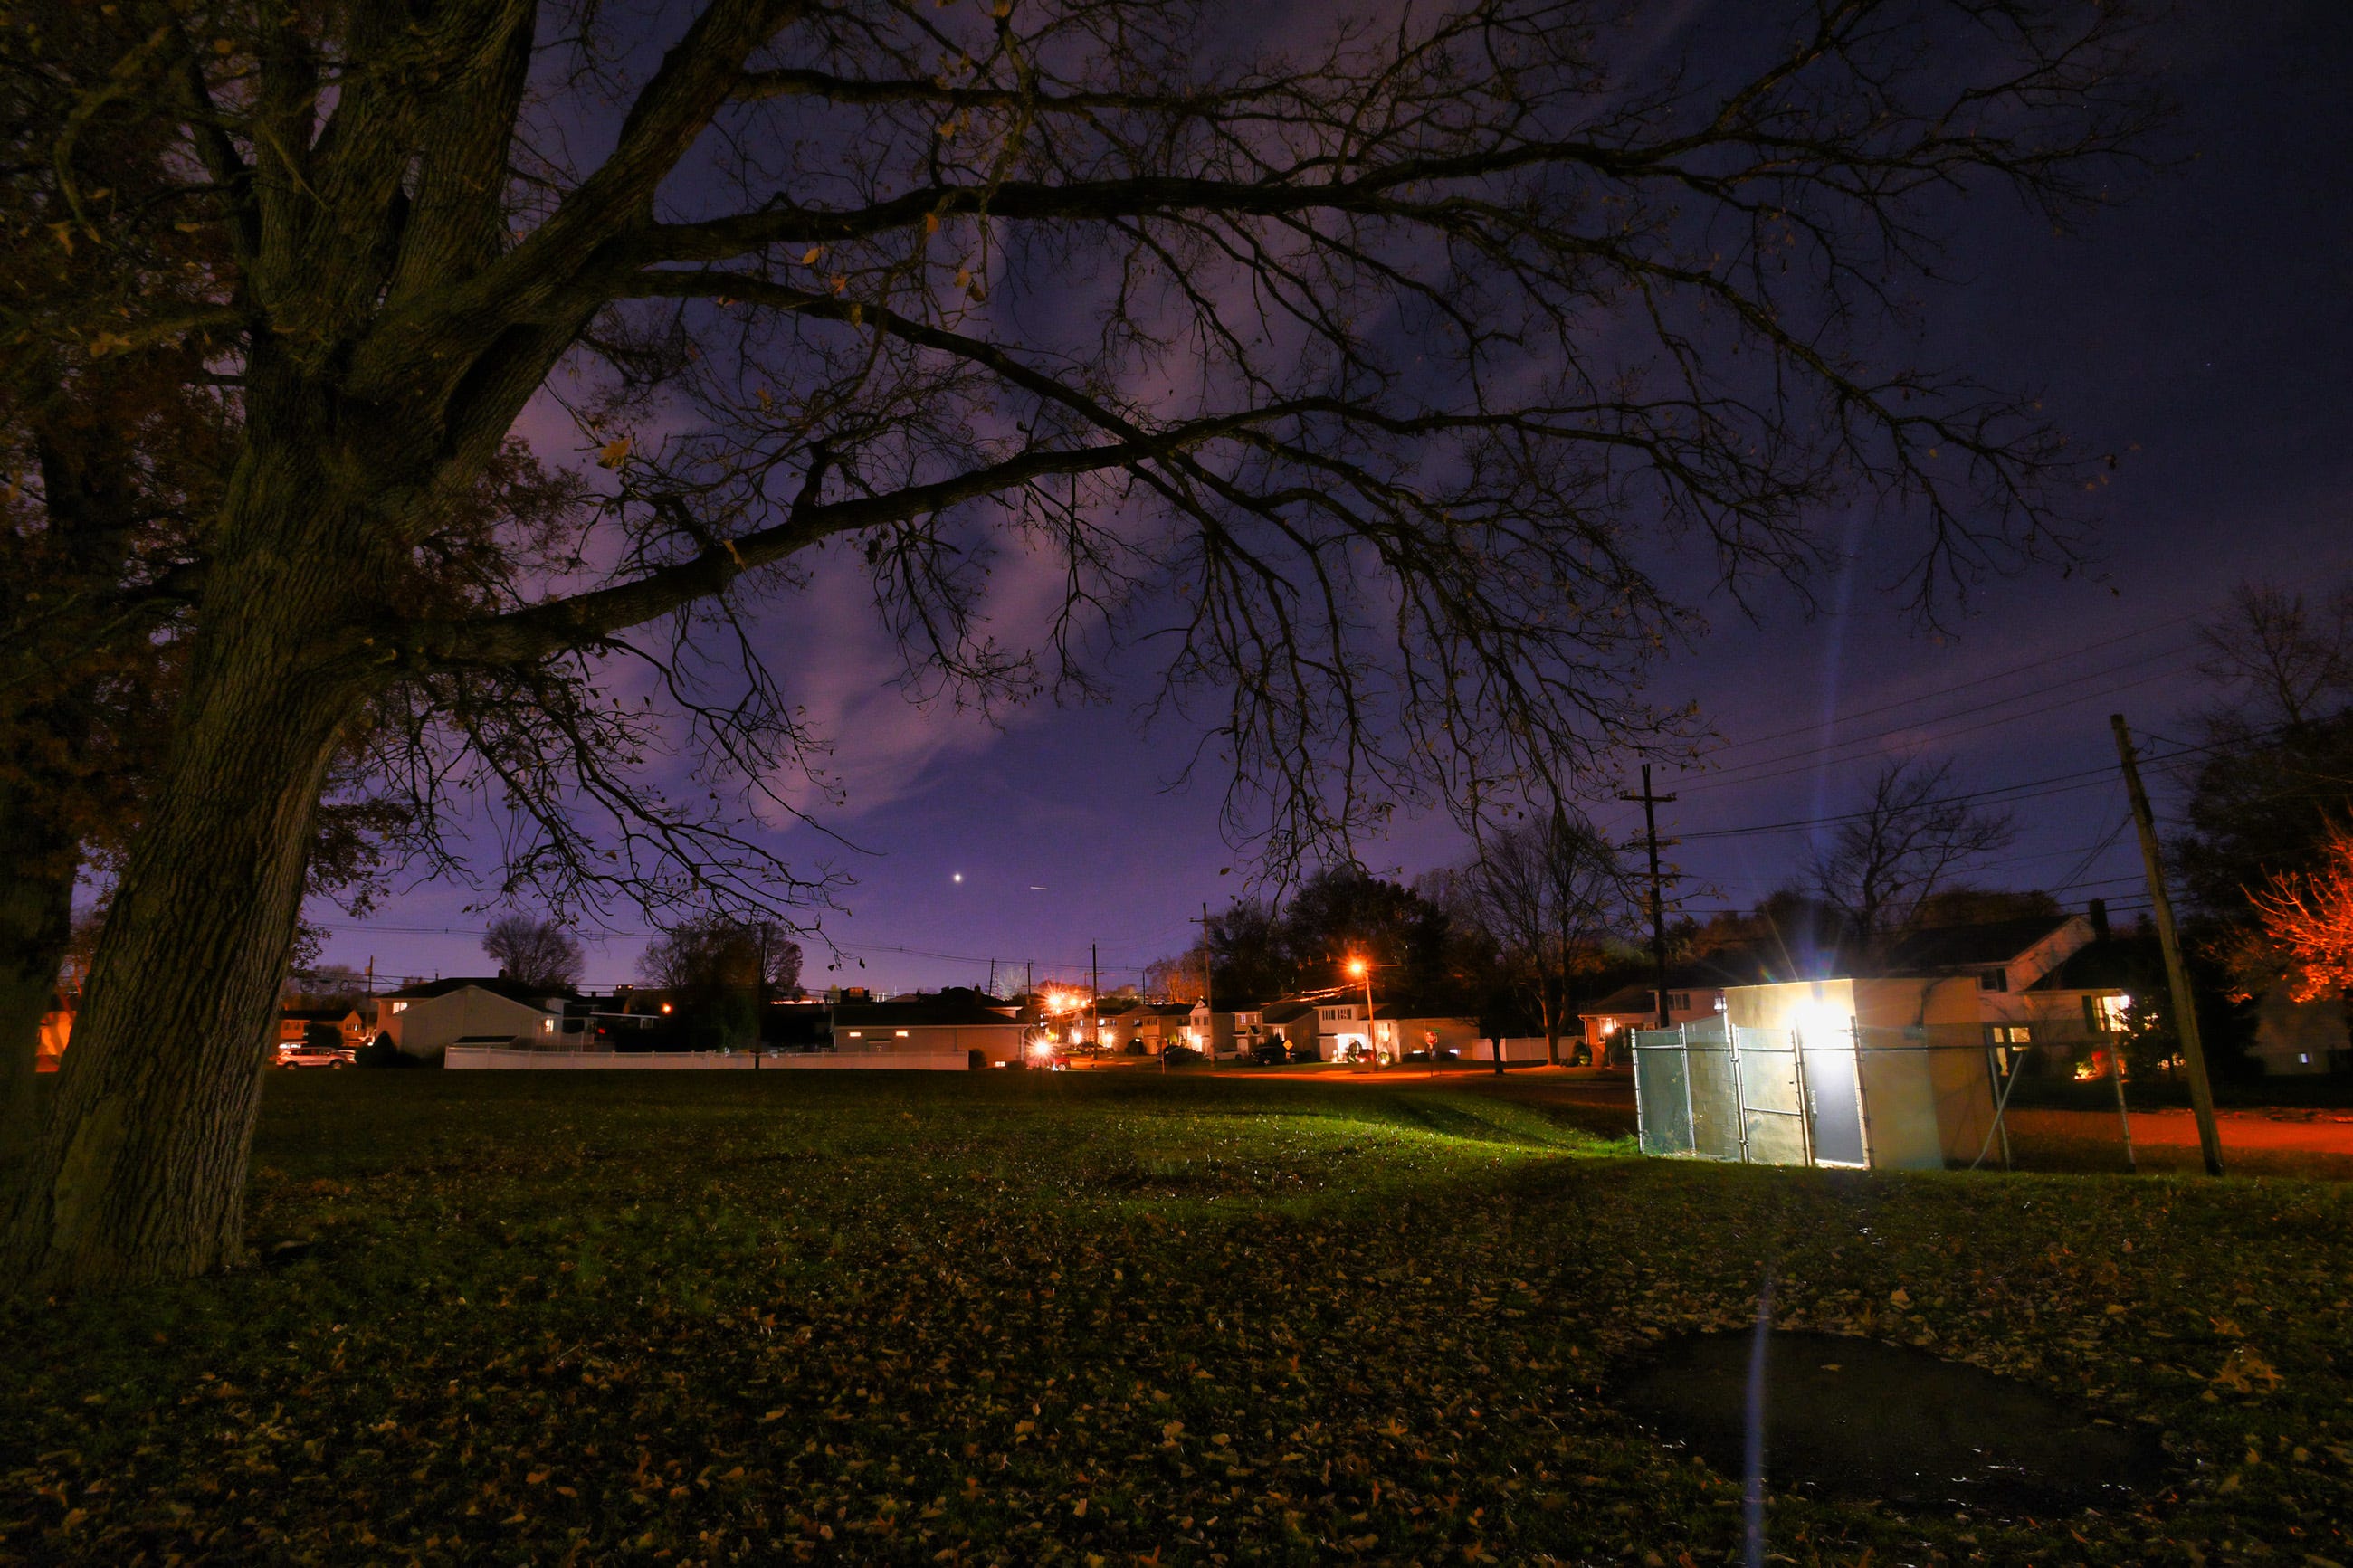 A night scene at the Westmoreland Park in Fair Lawn on 11/22/21.